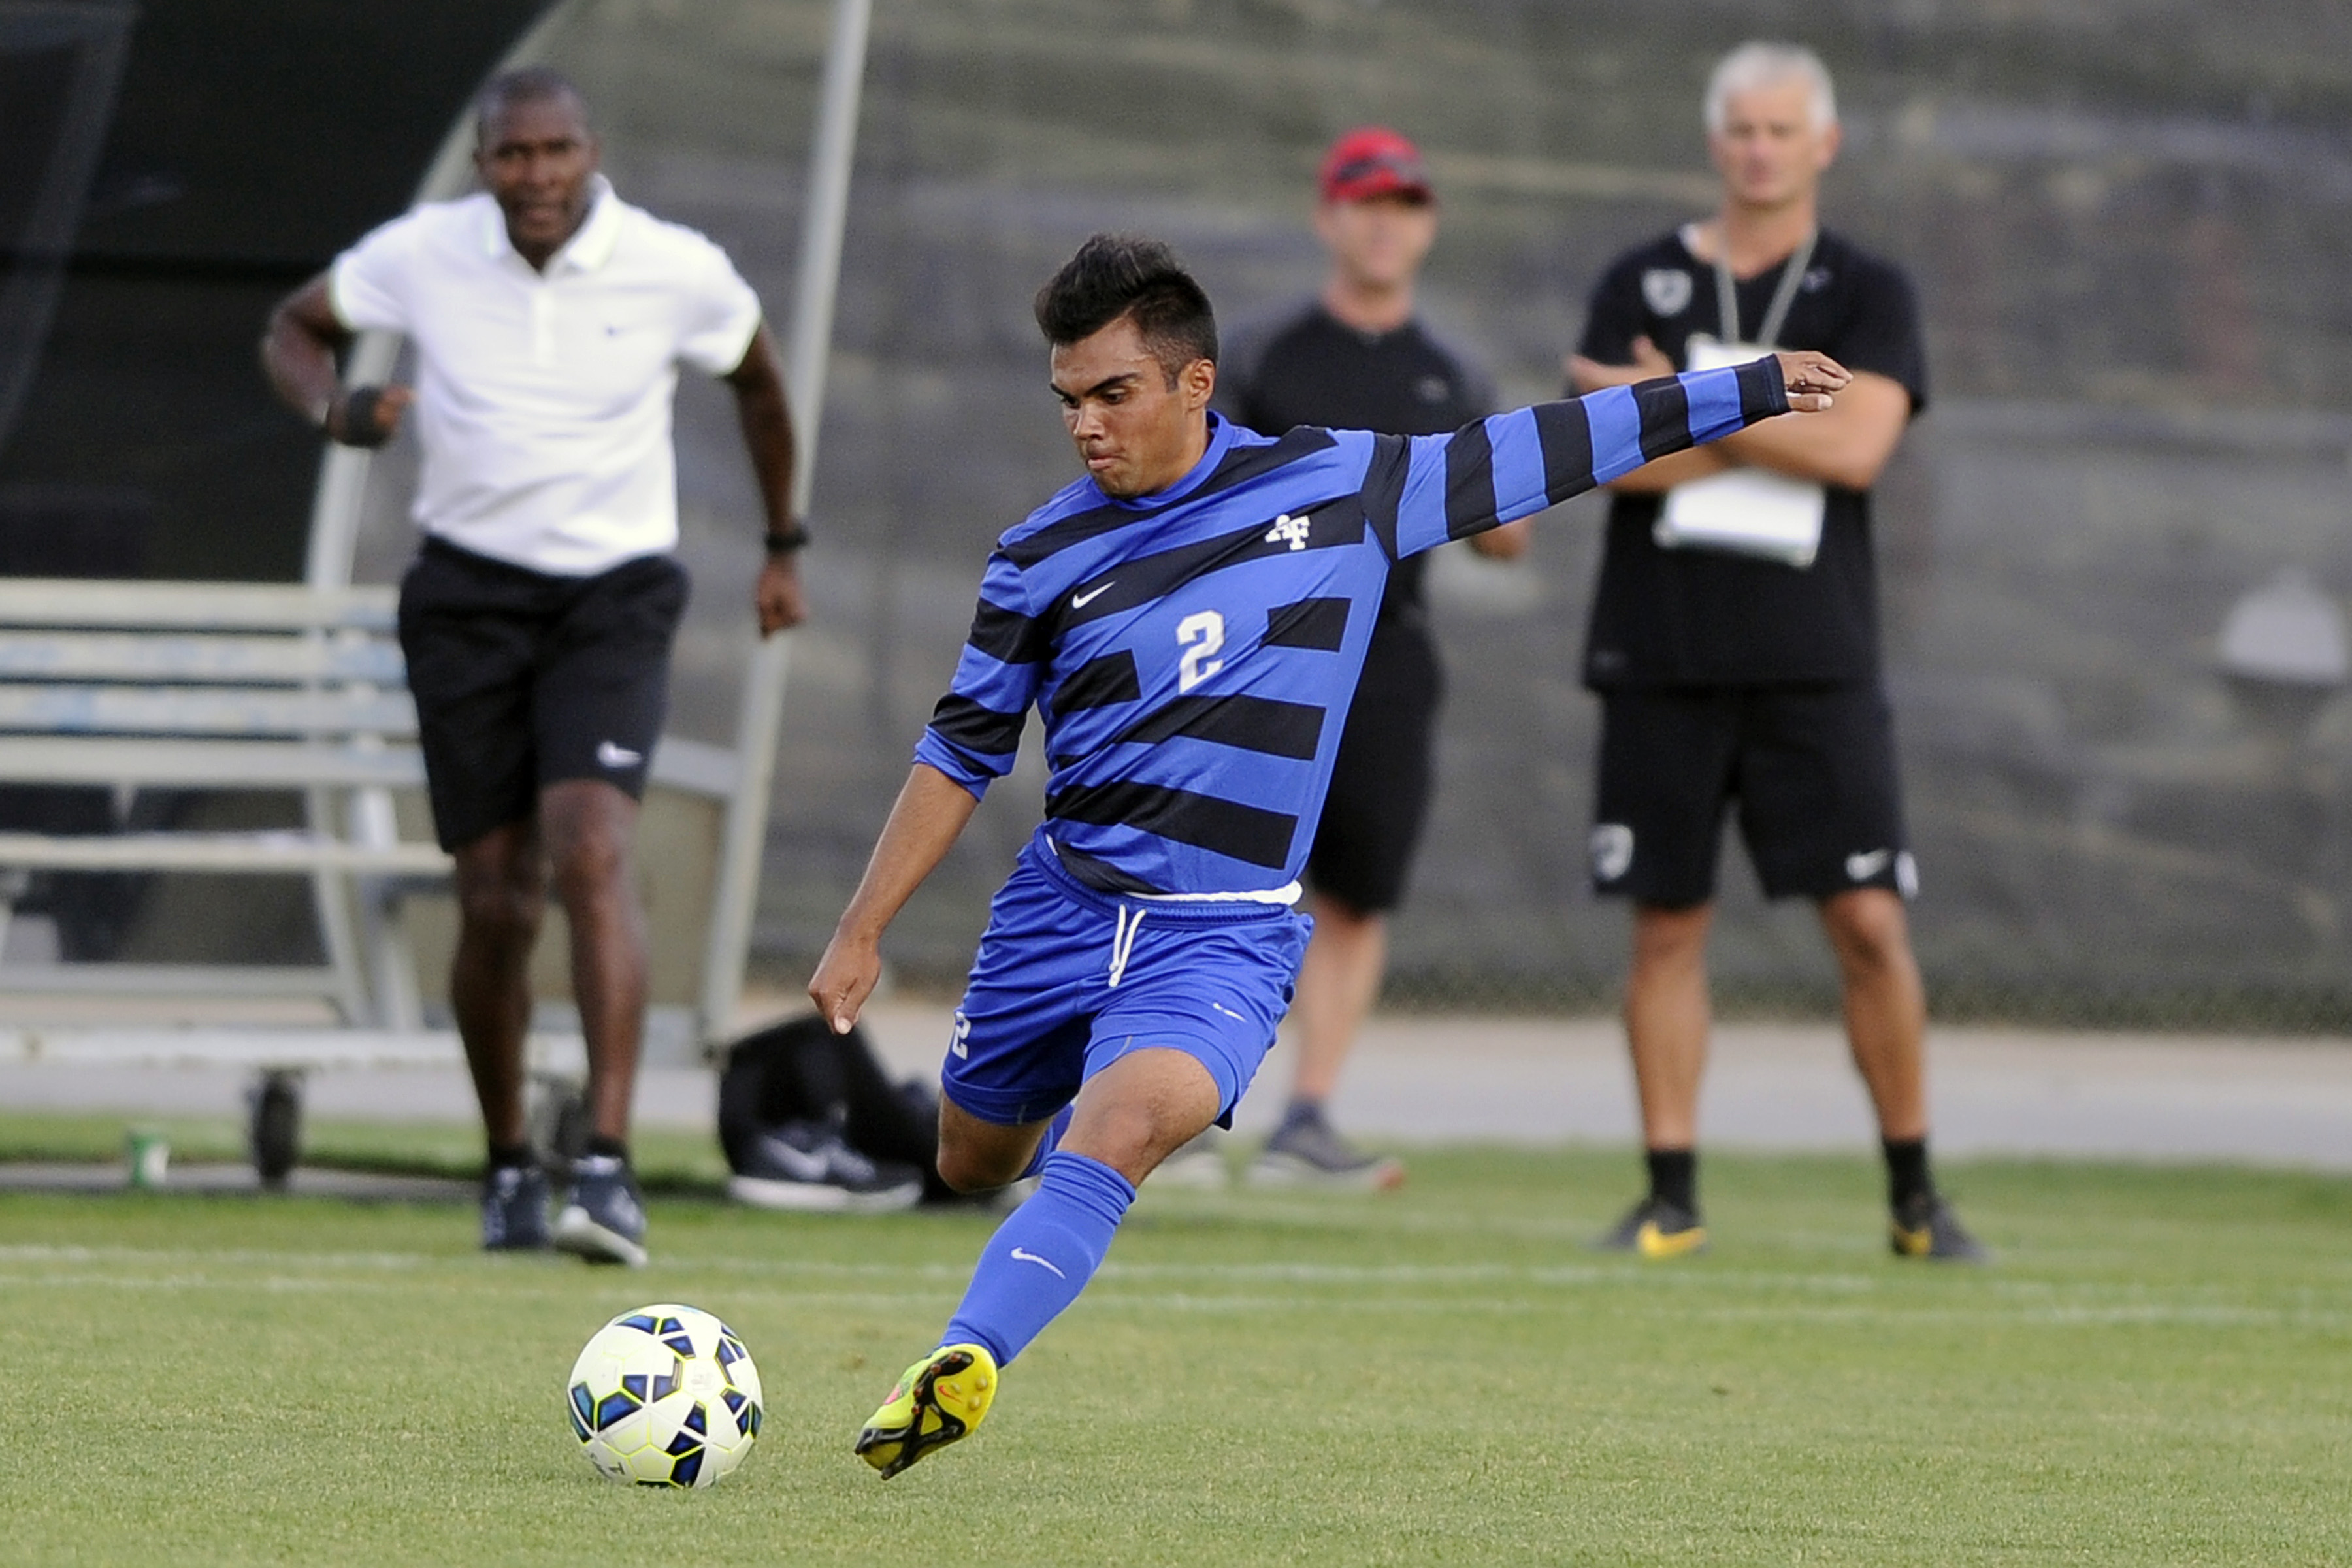 Men's Soccer: Air Force downs Army 1-0 in double-overtime season opener >United States Air Force Academy >News Display”></span> He was waived by the Crew on February 20, 2020. An absence of potential playing time, with Williams sitting fourth on the depth chart at the ahead position, was cited by the club as the reason behind the move. Humphries, Clayton (February 27, 2020). “Forward JJ Williams rejoins Legion FC on loan from Main League Soccer”. After passing by the league’s waiver system on February 27, it was introduced that he would return to Birmingham Legion for the 2020 season, officially on a mortgage from MLS. Myers, Jacob (February 20, 2020). “Columbus Crew waives forward JJ Williams, 2019 first-spherical draft choose”. He added his first NCAA tournament purpose on November 20, albeit in a 3-2 loss to Creighton in the second spherical. He replaced Chandler Hoffman in the 52nd minute in opposition to Saint Louis FC, occurring to score his first two professional goals in a six-minute span to help Birmingham earn a 3-2 victory. In his second match for the Hammers, Williams was despatched off in the 72nd minute of a 2-zero defeat in opposition to Chattanooga FC after a collision with Chattanooga goalkeeper Greg Hartley. The sport requires match credits, which might be earned by playfish cash, penalty shootouts, <a href=